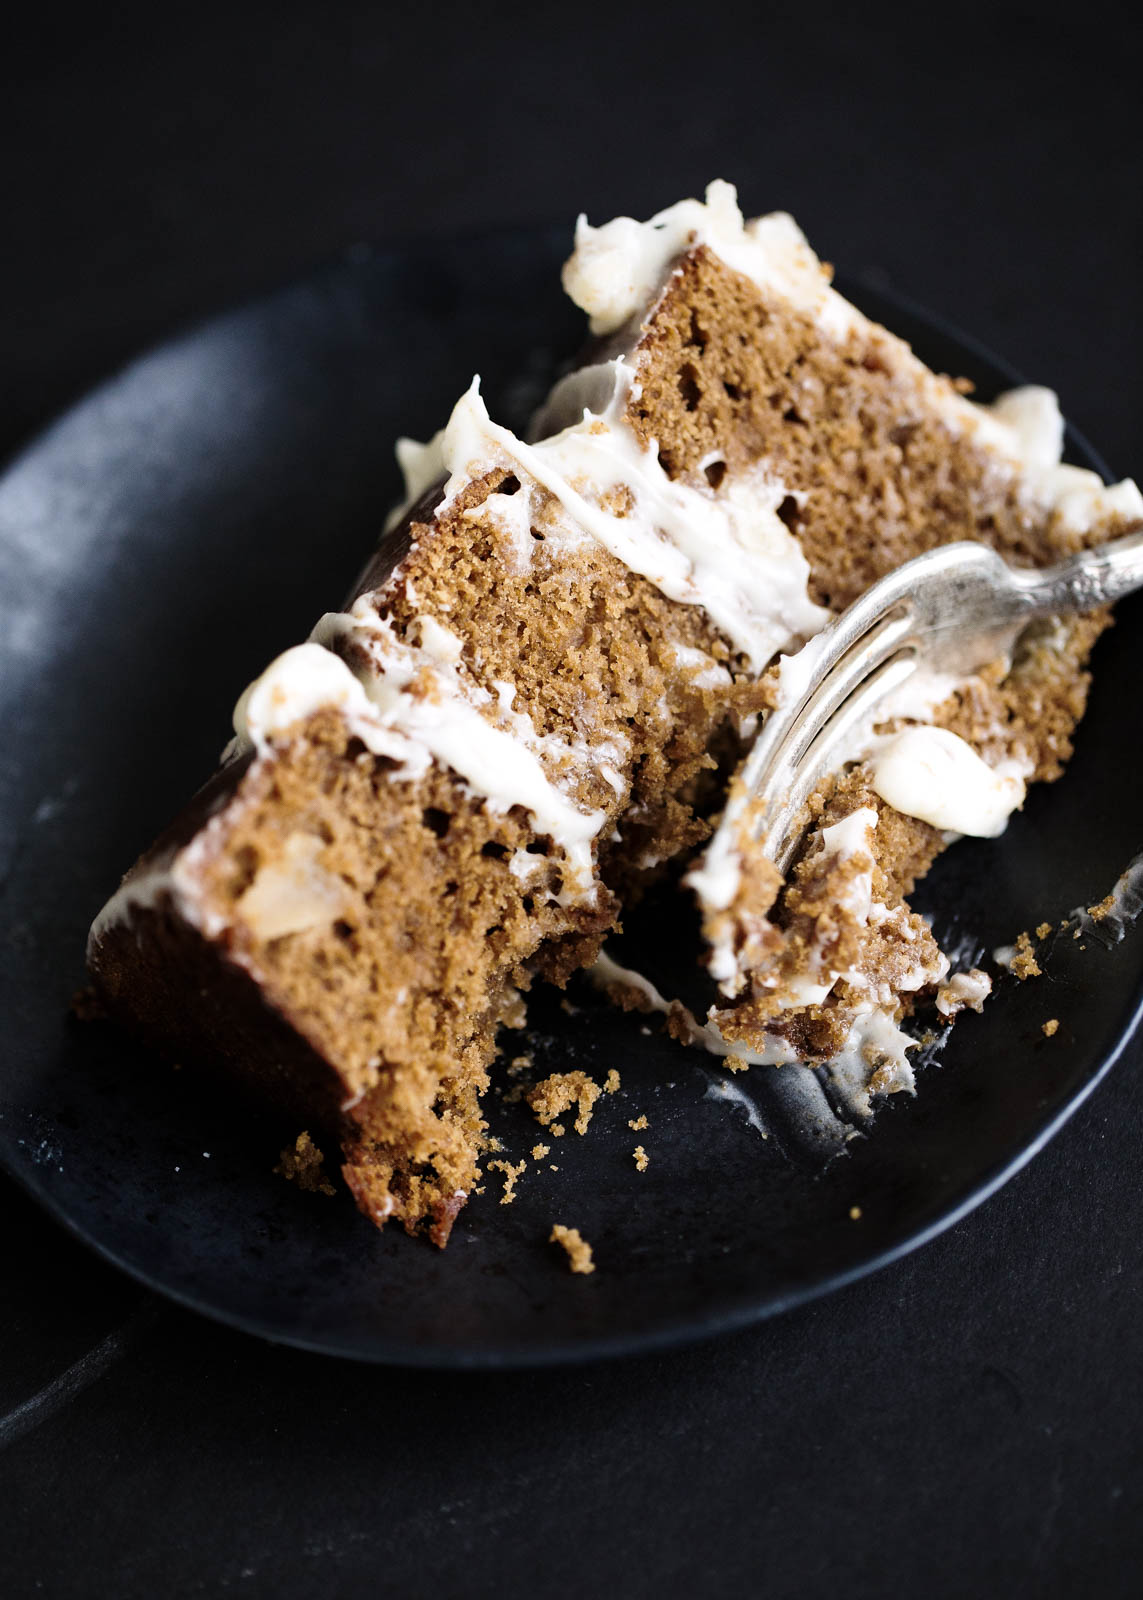 A moist ginger molasses cake with fresh apples and a creamy mascarpone frosting. Talk about fall cake goals!!